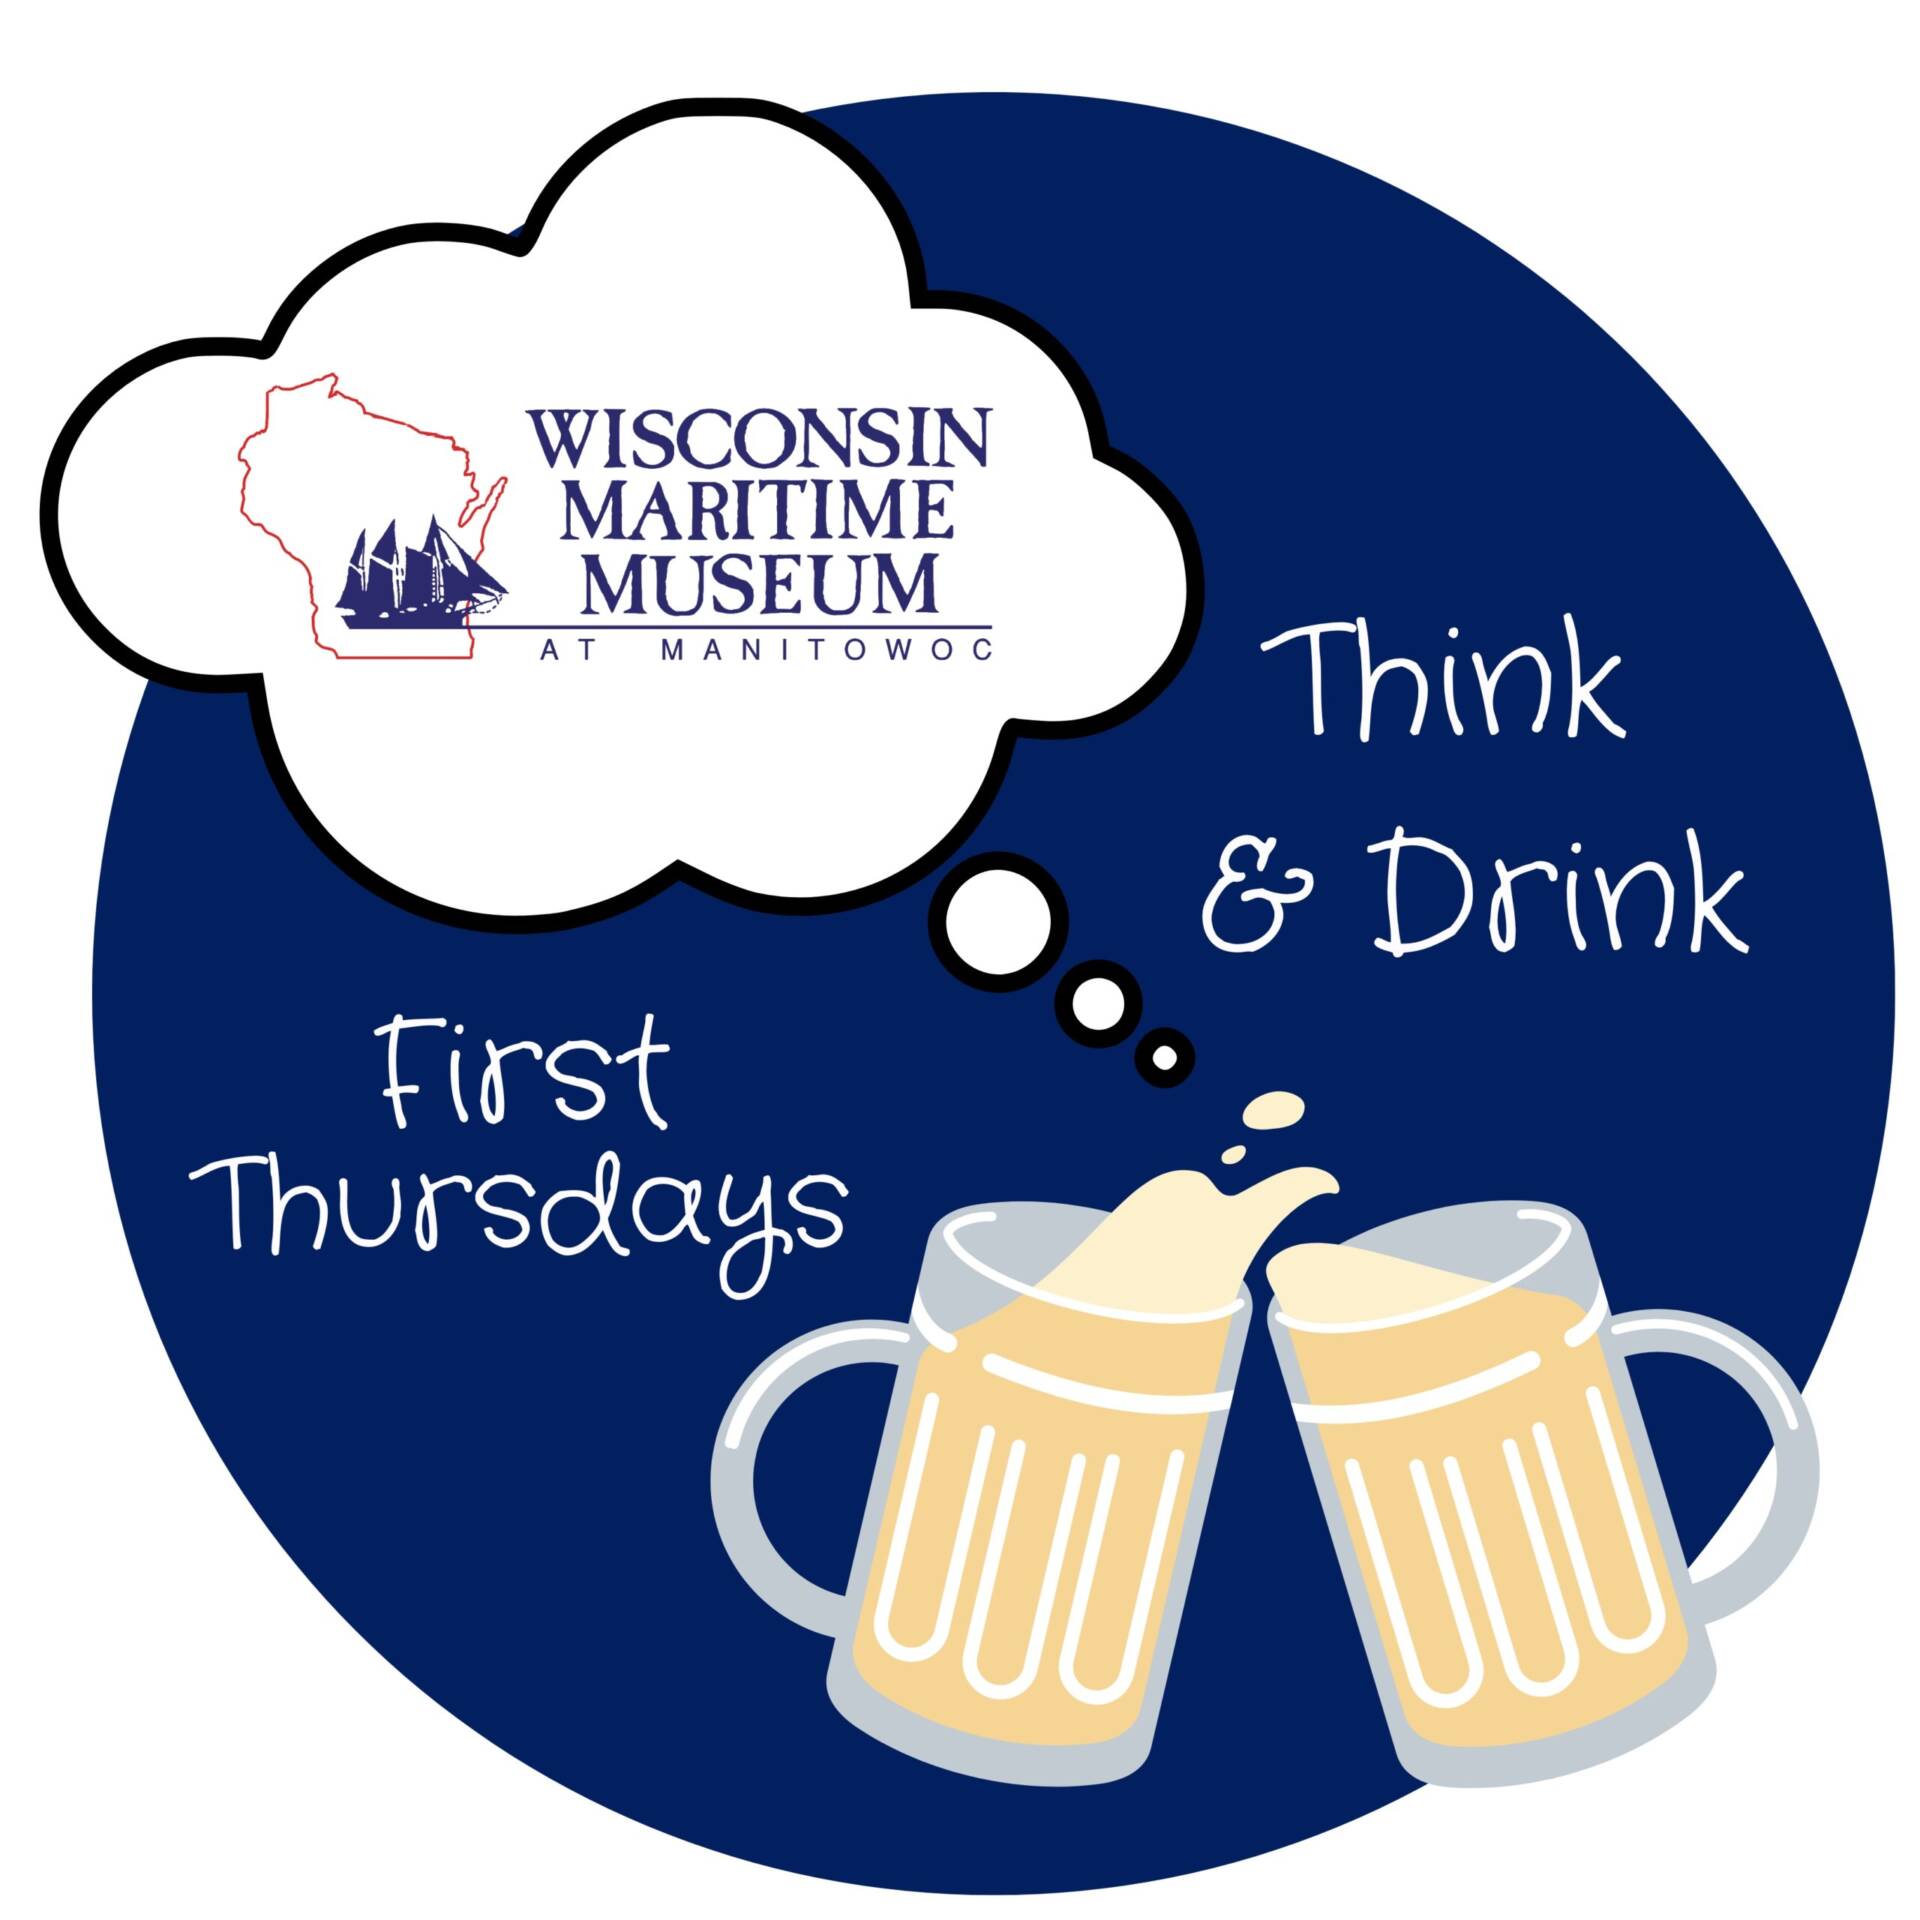 Think 'n Drink Program logo featuring two clinking beer mugs